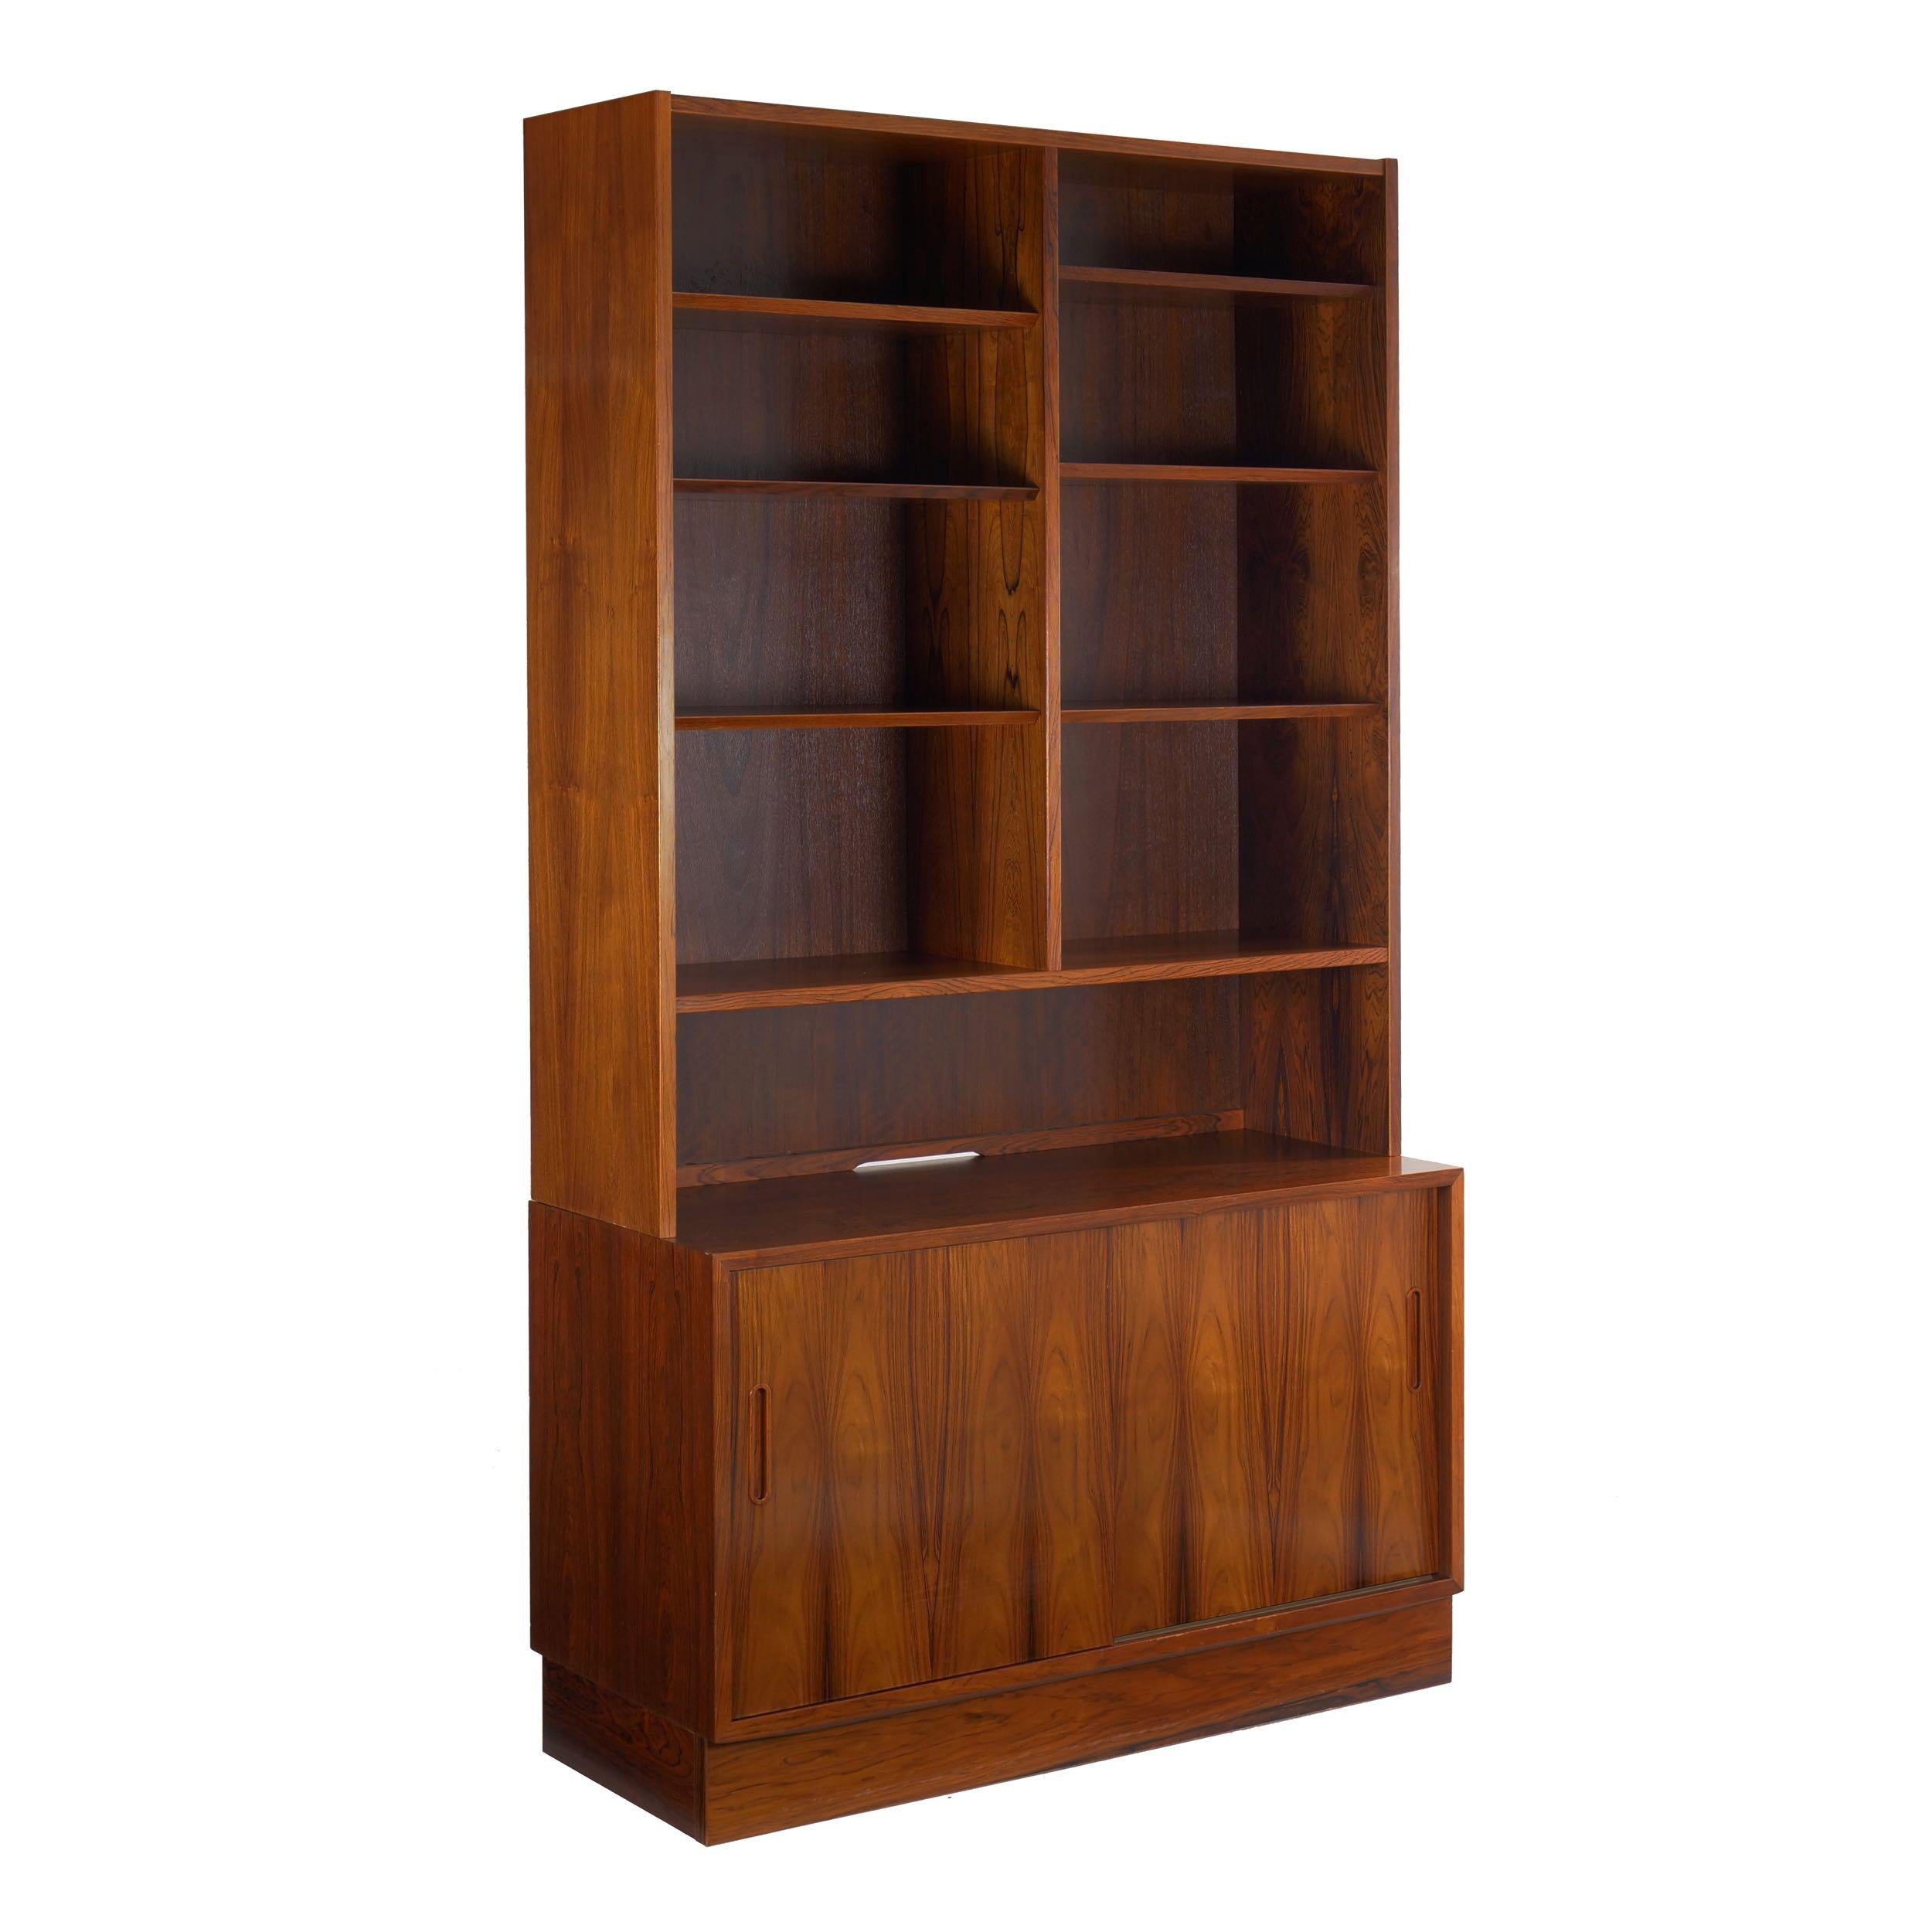 This most striking bookcase-over-cabinet by the firm of Hundevad & Co. is austere in form while rich in surface. Hundevad & Co was founded in 1935 in Ulfborg, Denmark and had quite a significant output during the period. The present piece is